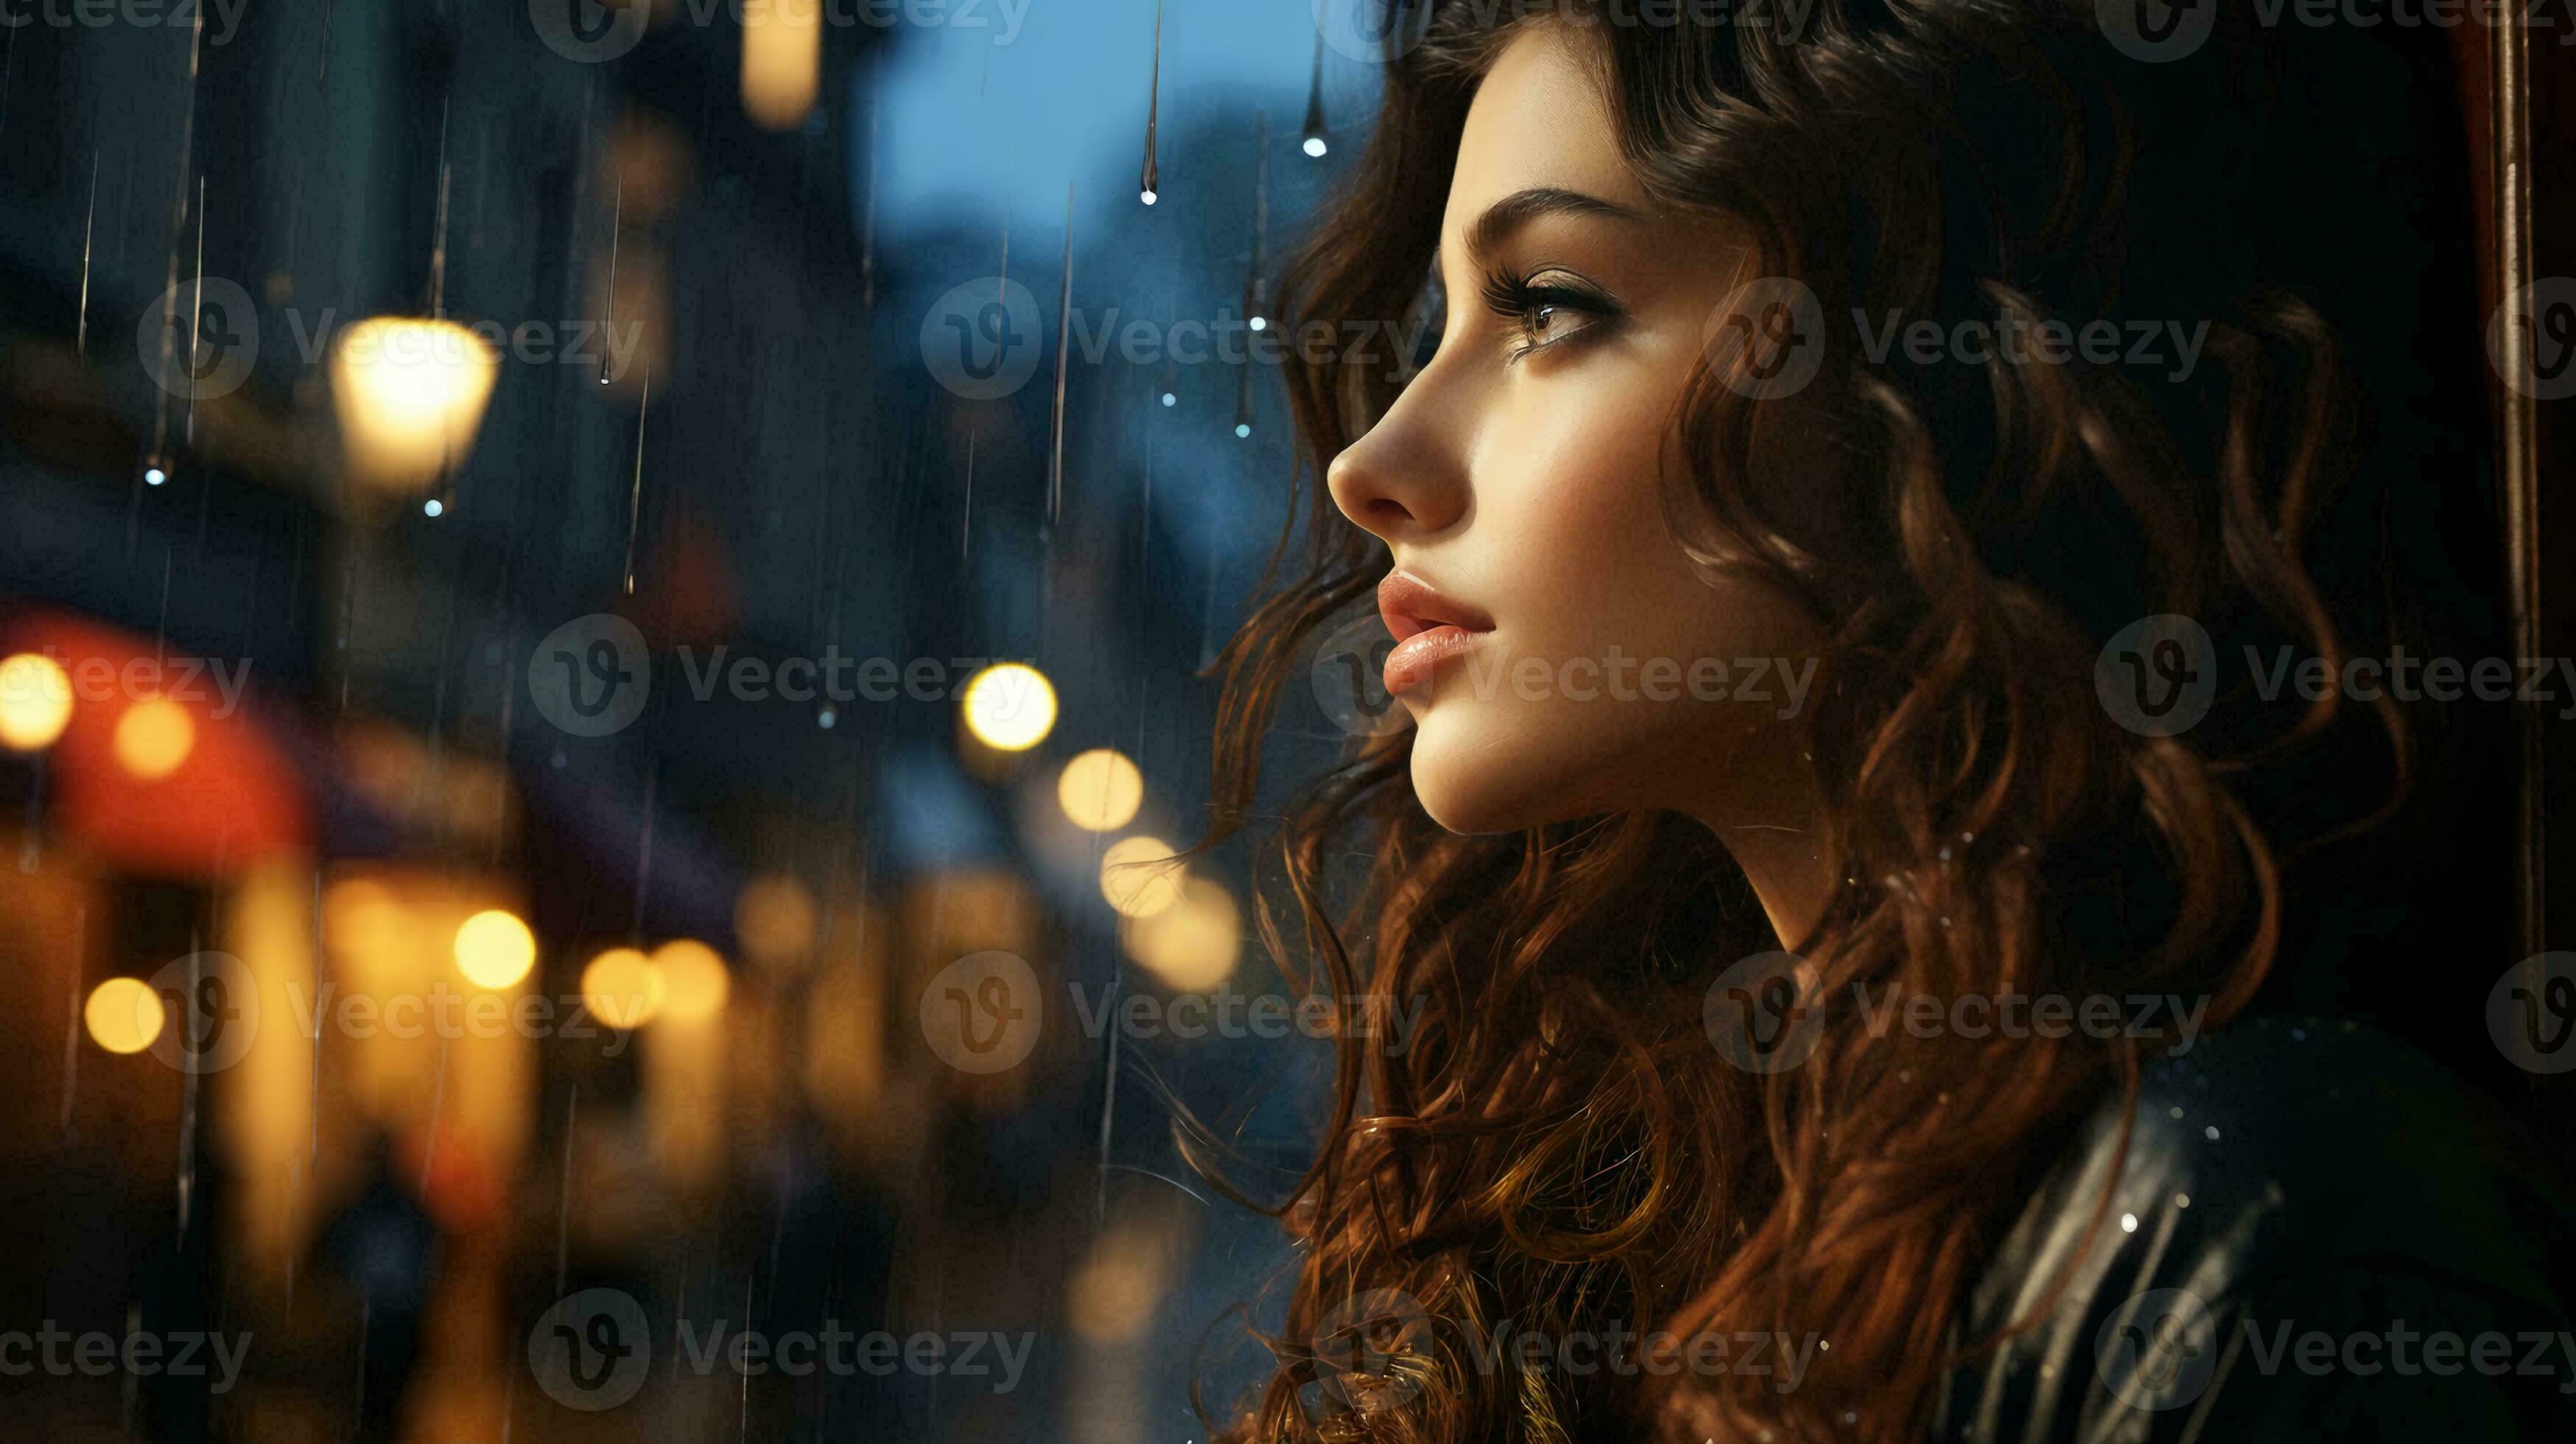 A beautiful pensive woman looks out the window at night during the rain ...